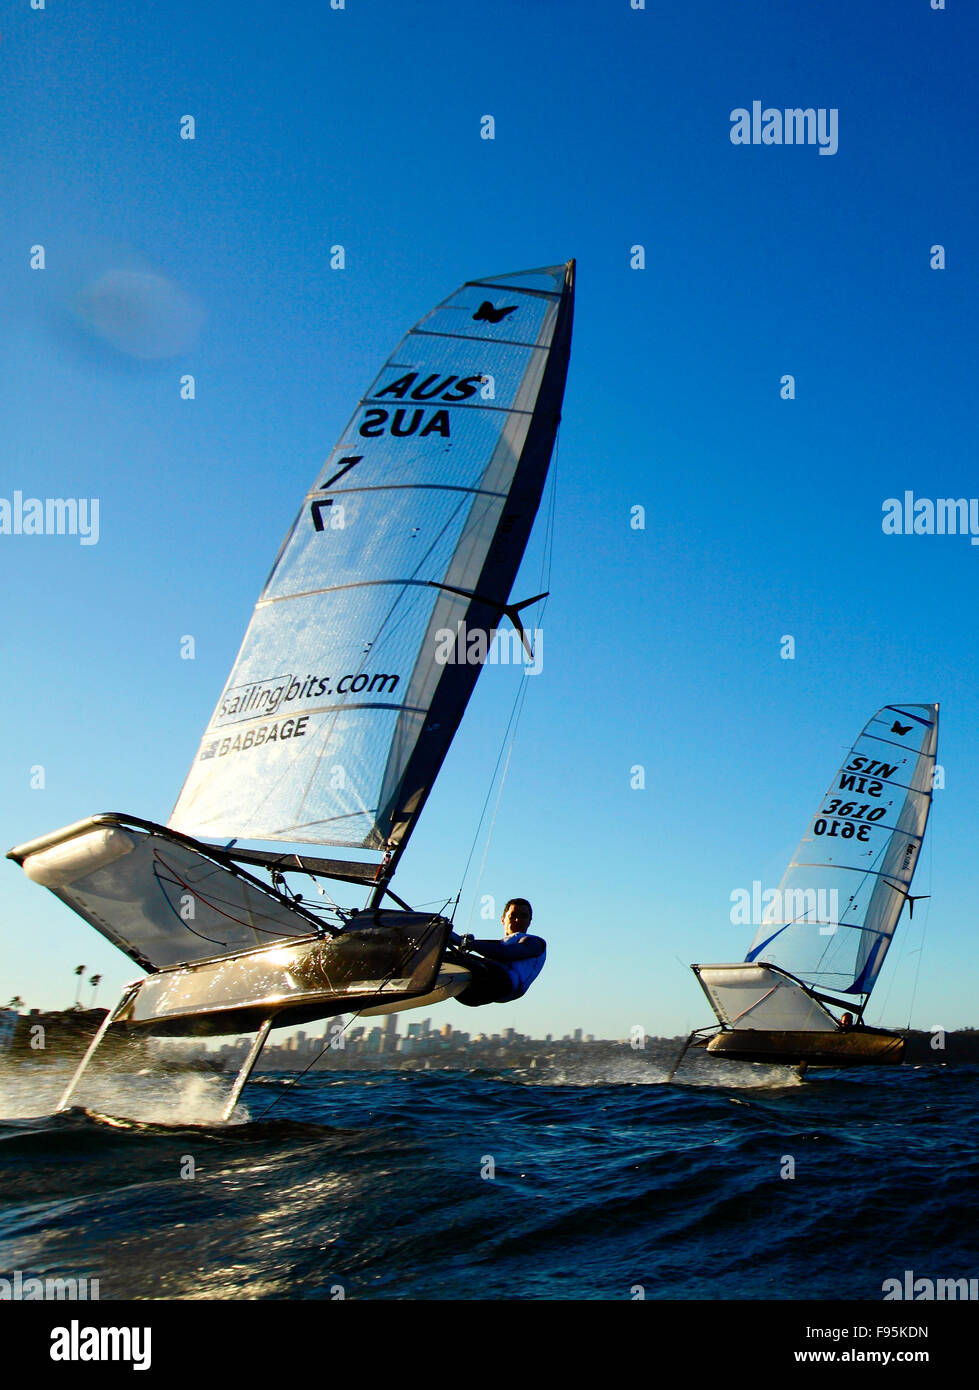 Scott Babbage in a training session on his Moth Mach 2 in Sydney Harbour, Single-handed sailing dinghy with hydro-foils. Stock Photo